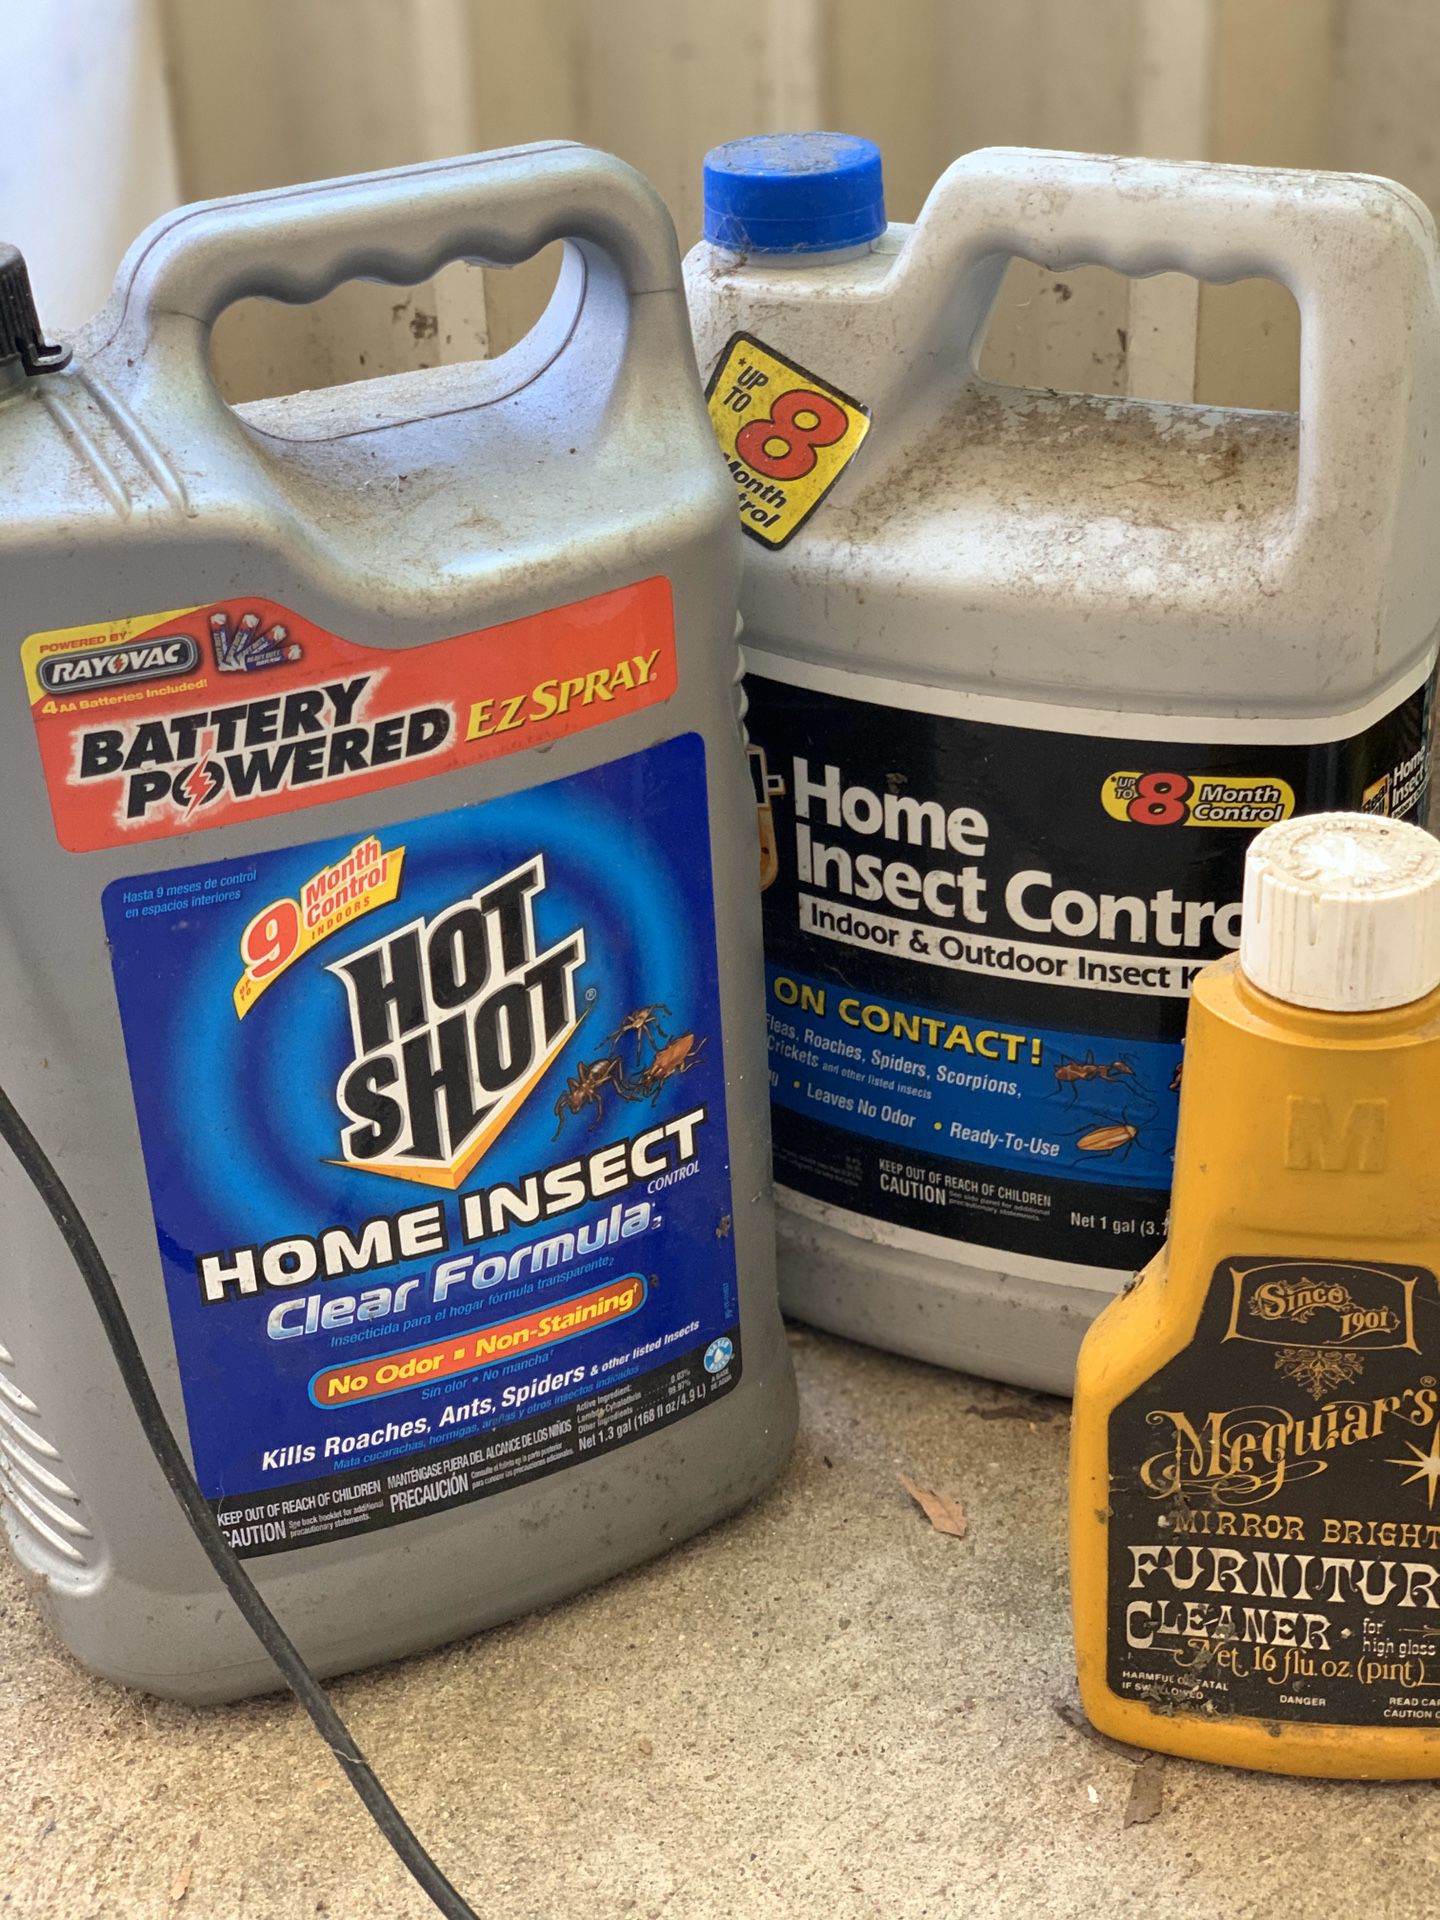 Insect killer and other miscellaneous items